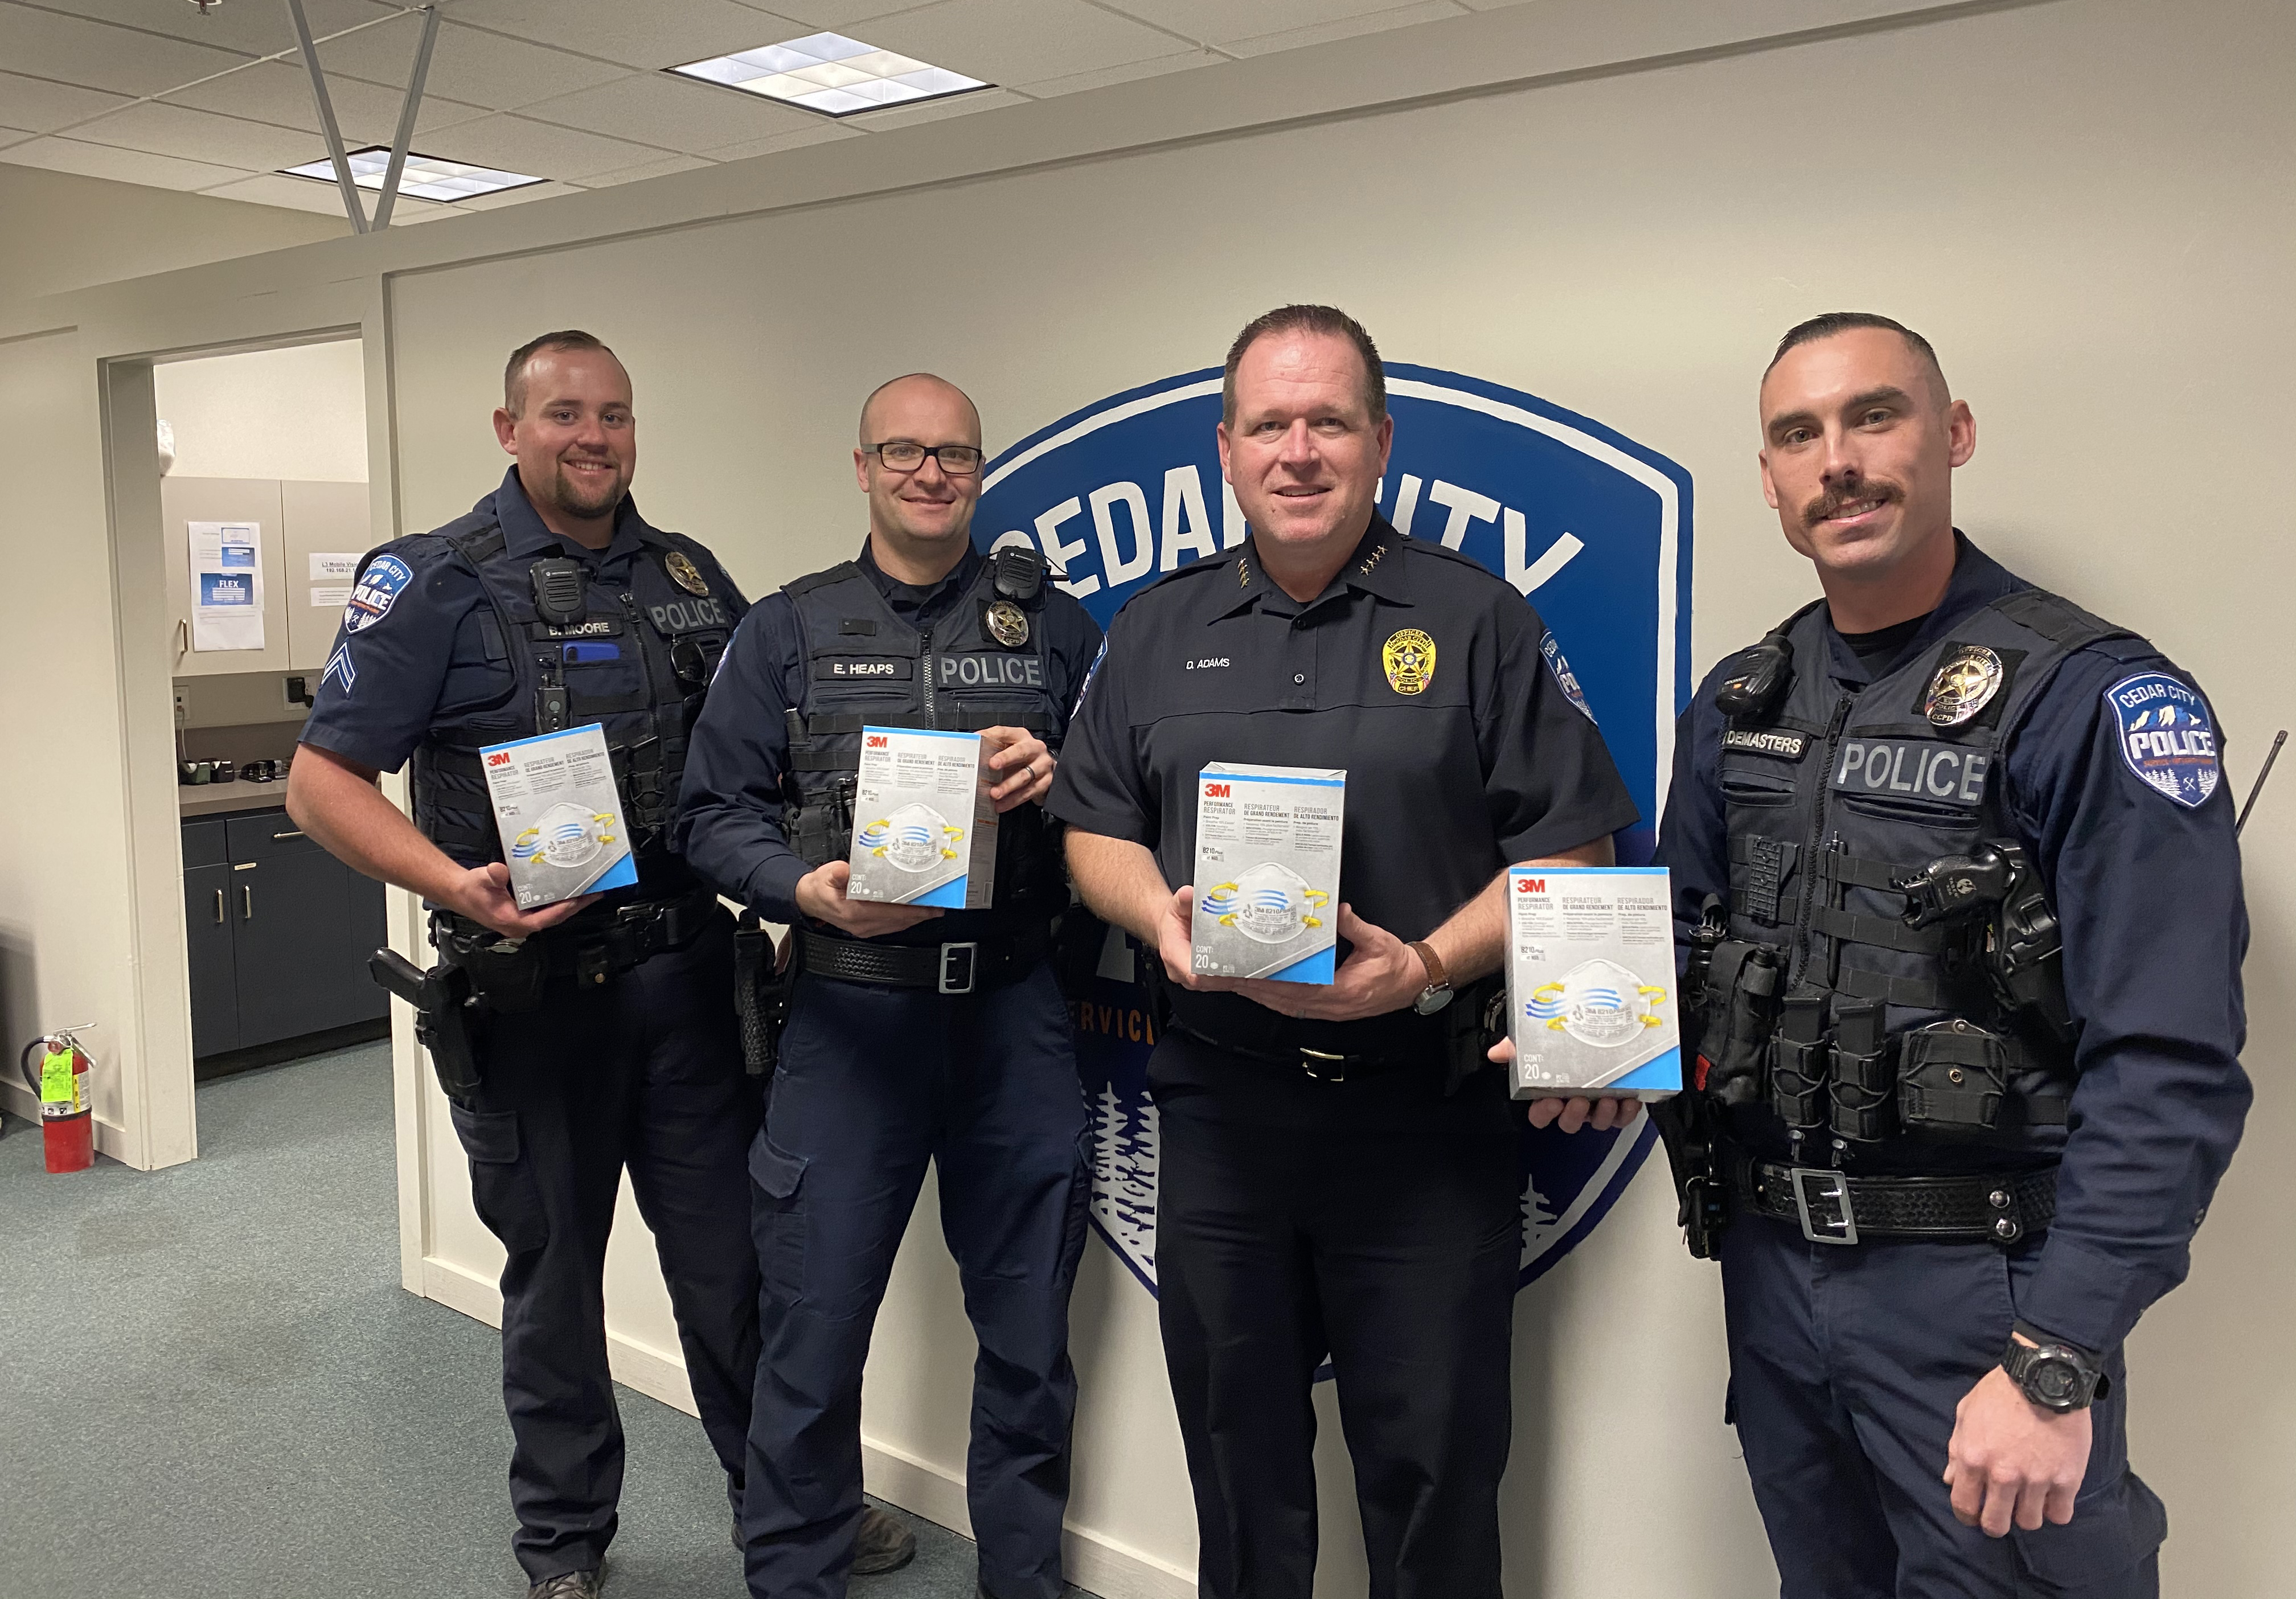 PC Laptops Launches Fundraiser to Protect First Responders During COVID-19